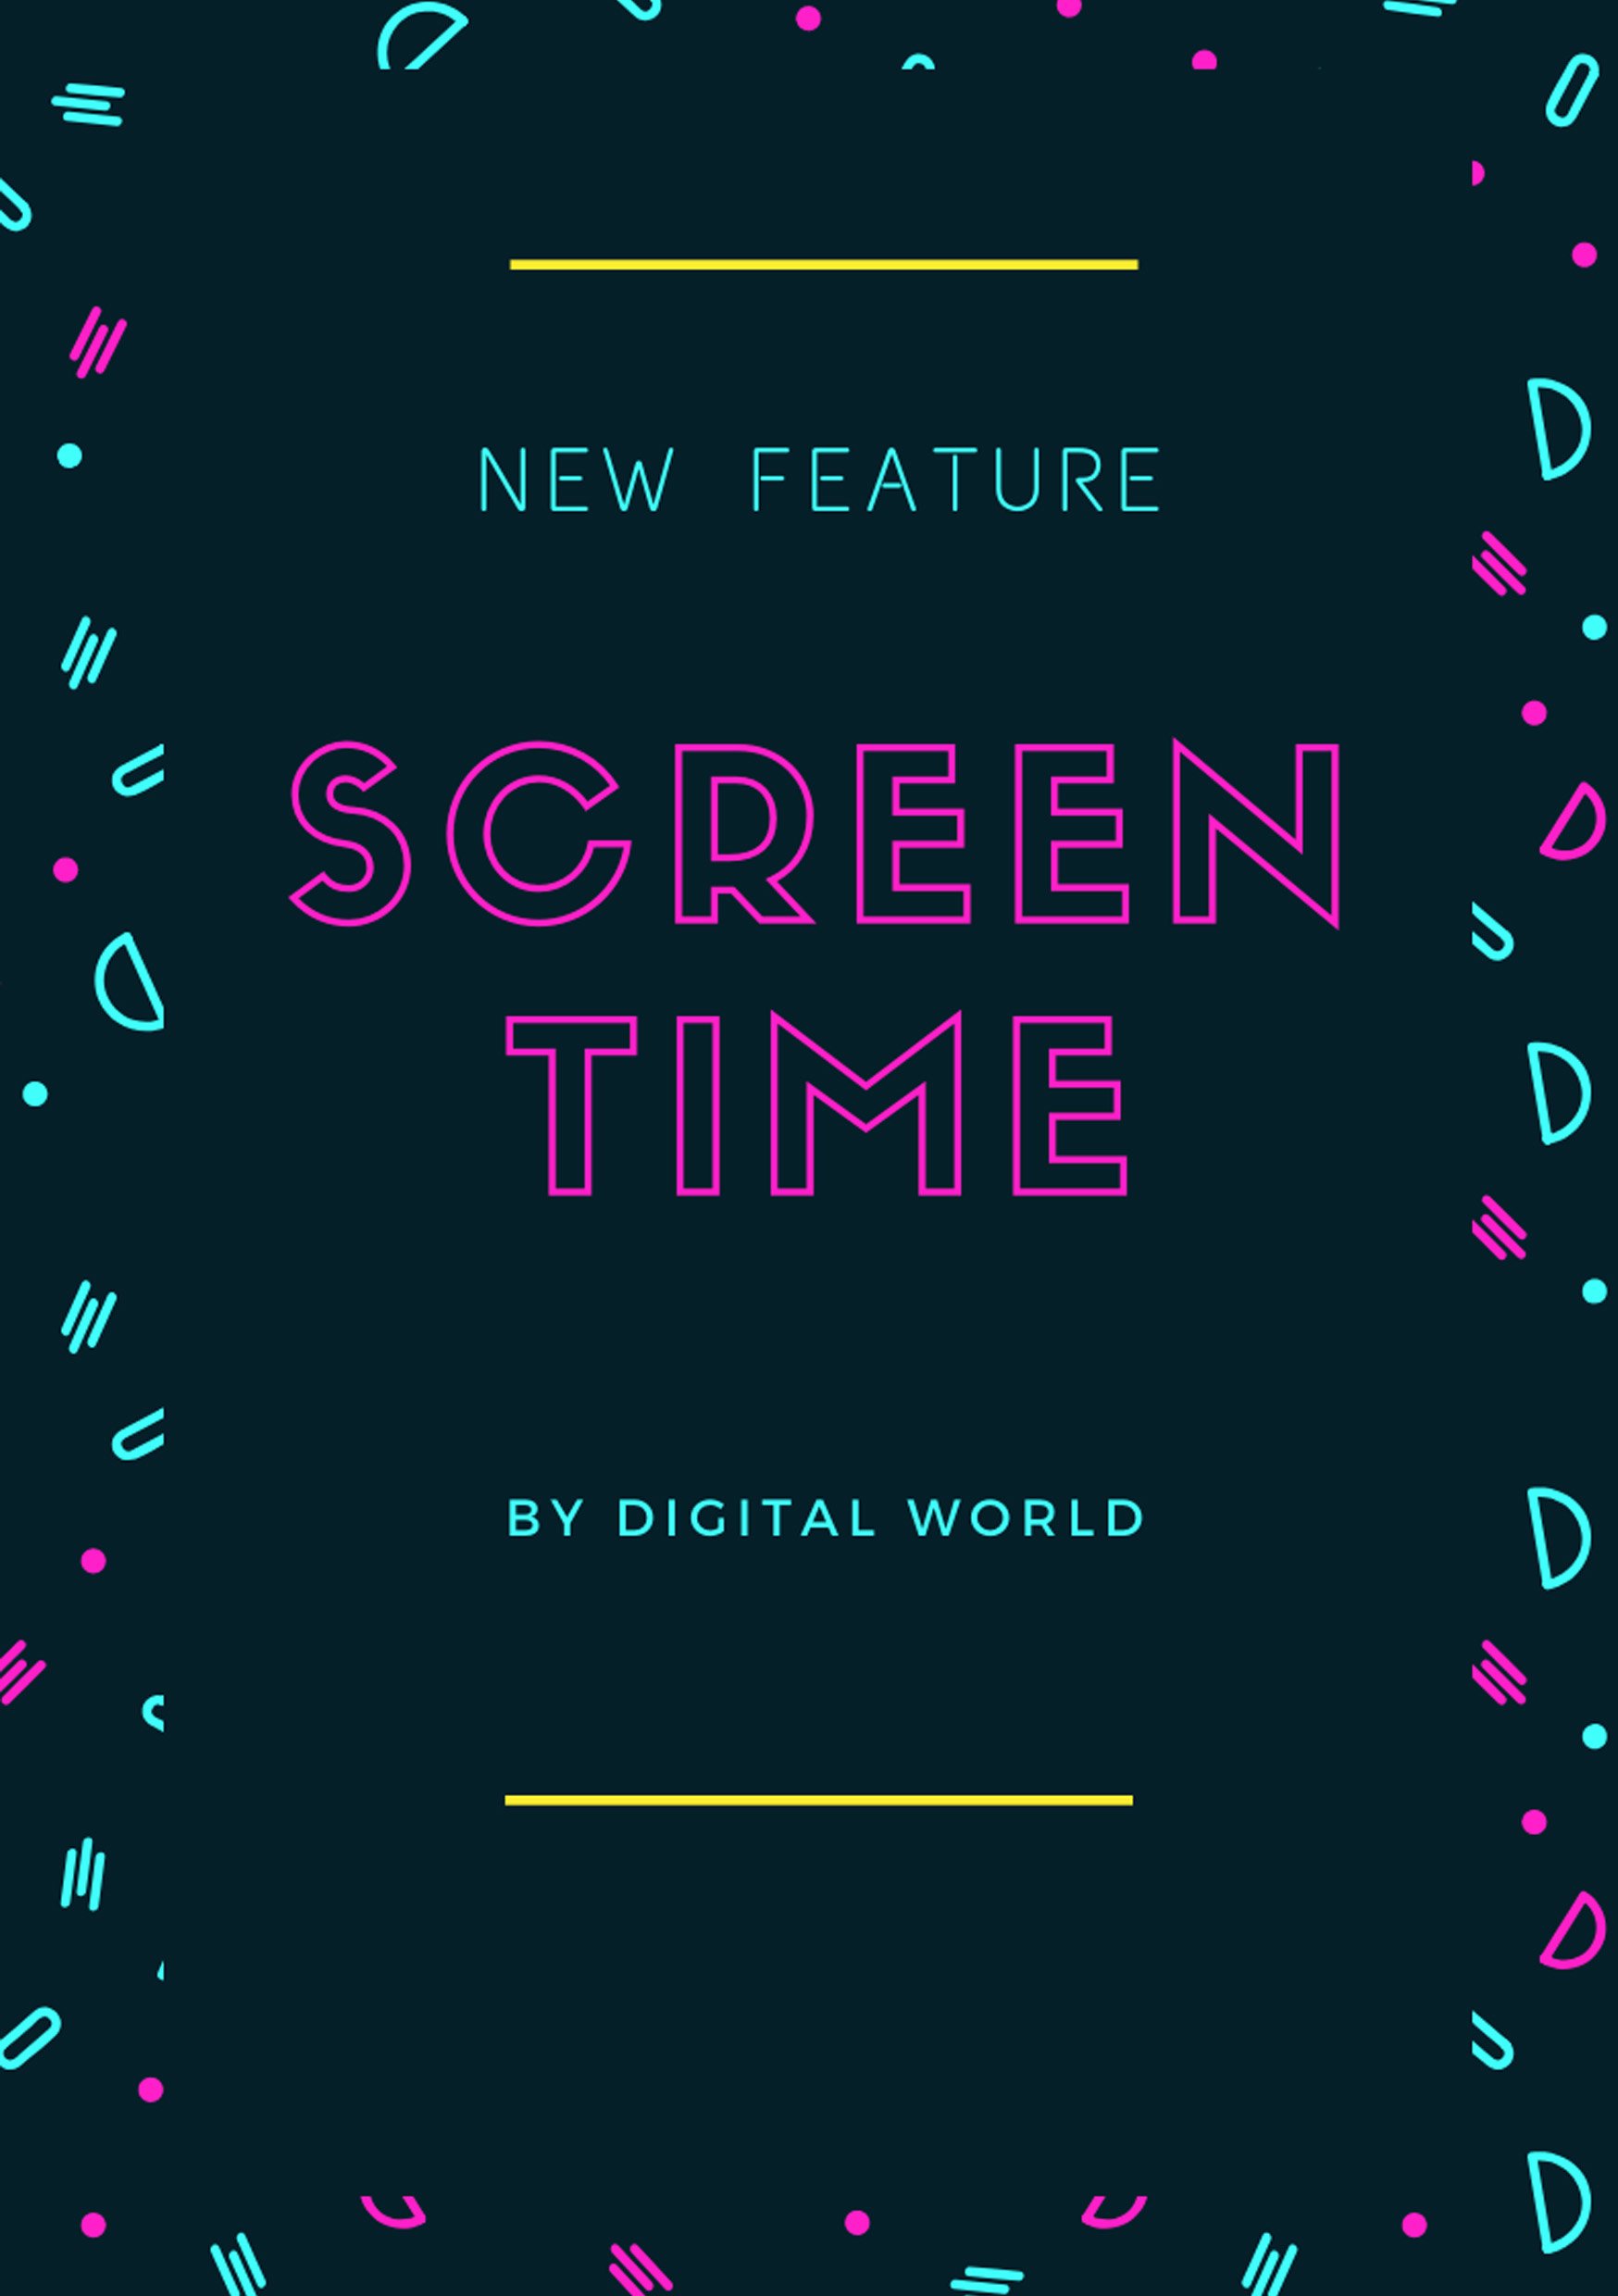 Screen Time featured in Digital World